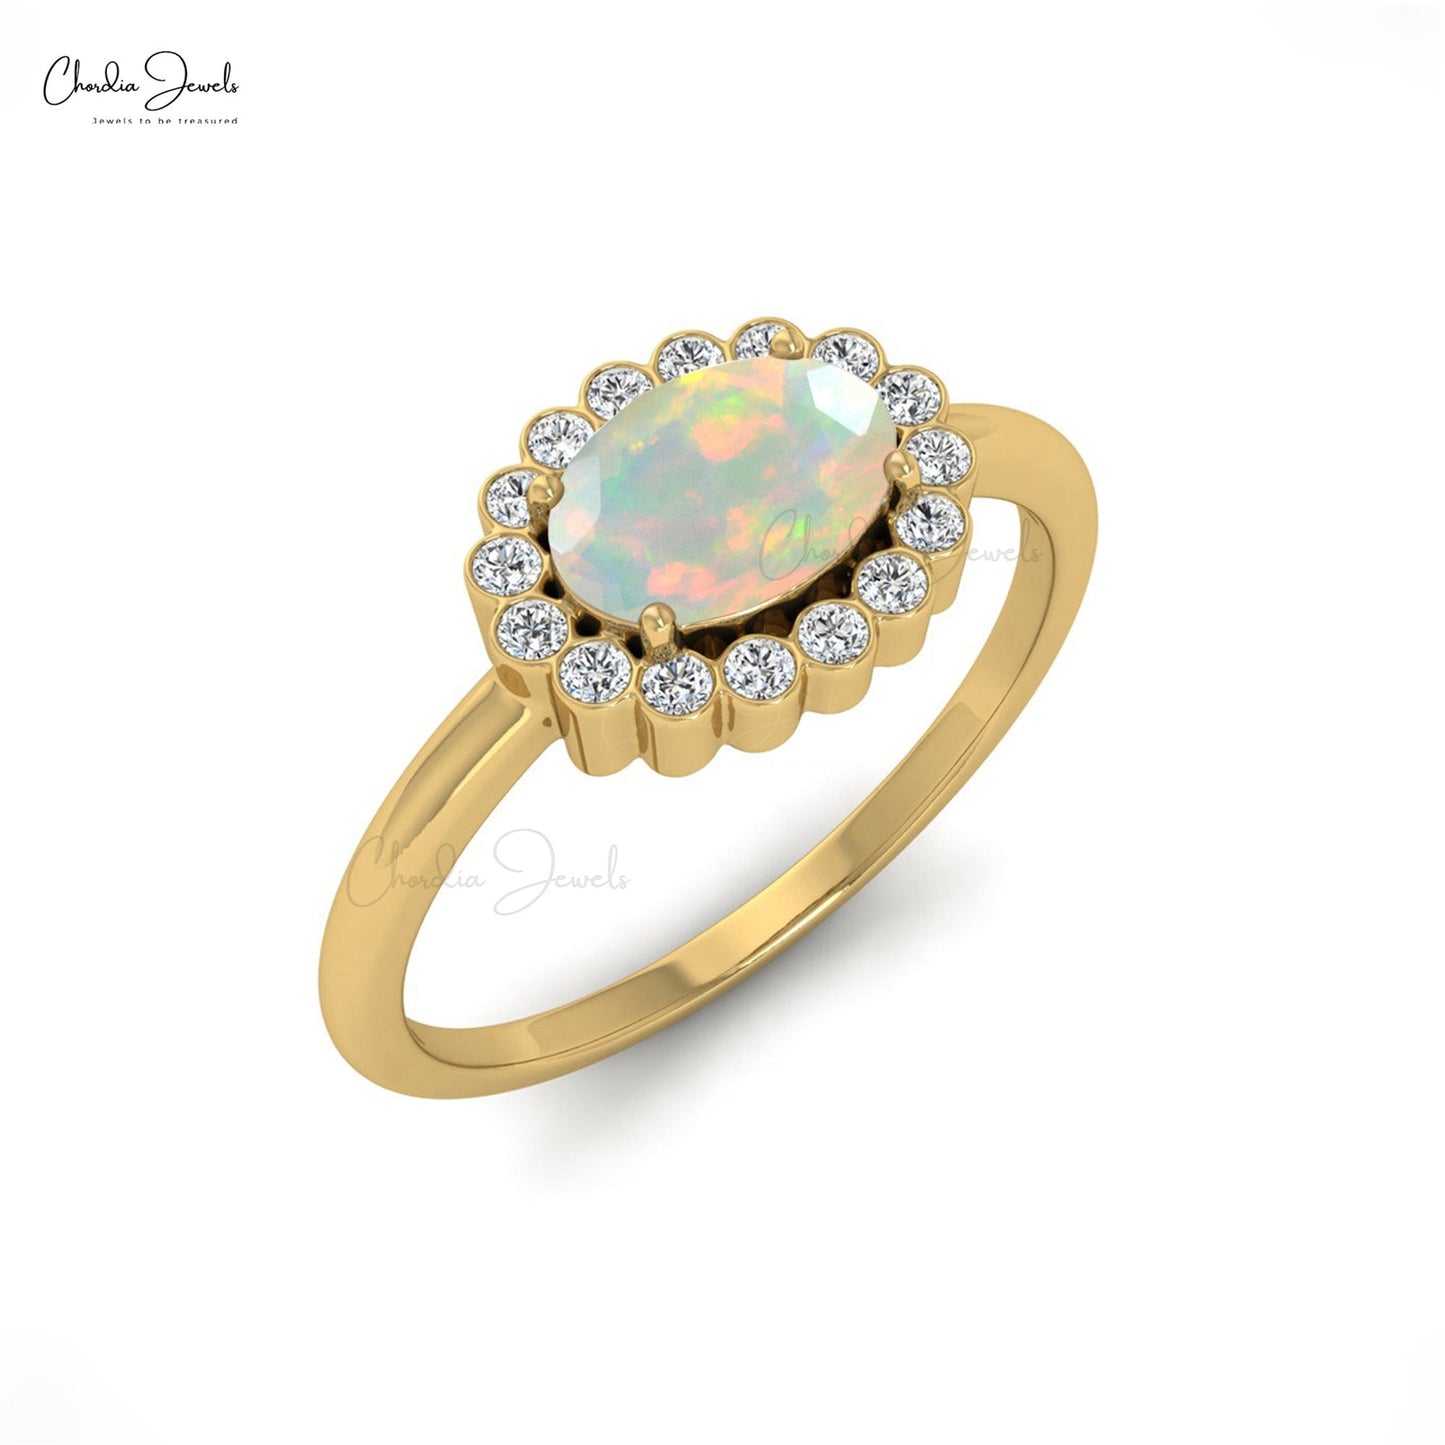 Unique 7x5mm Opal Engagement Ring With Diamond Halo